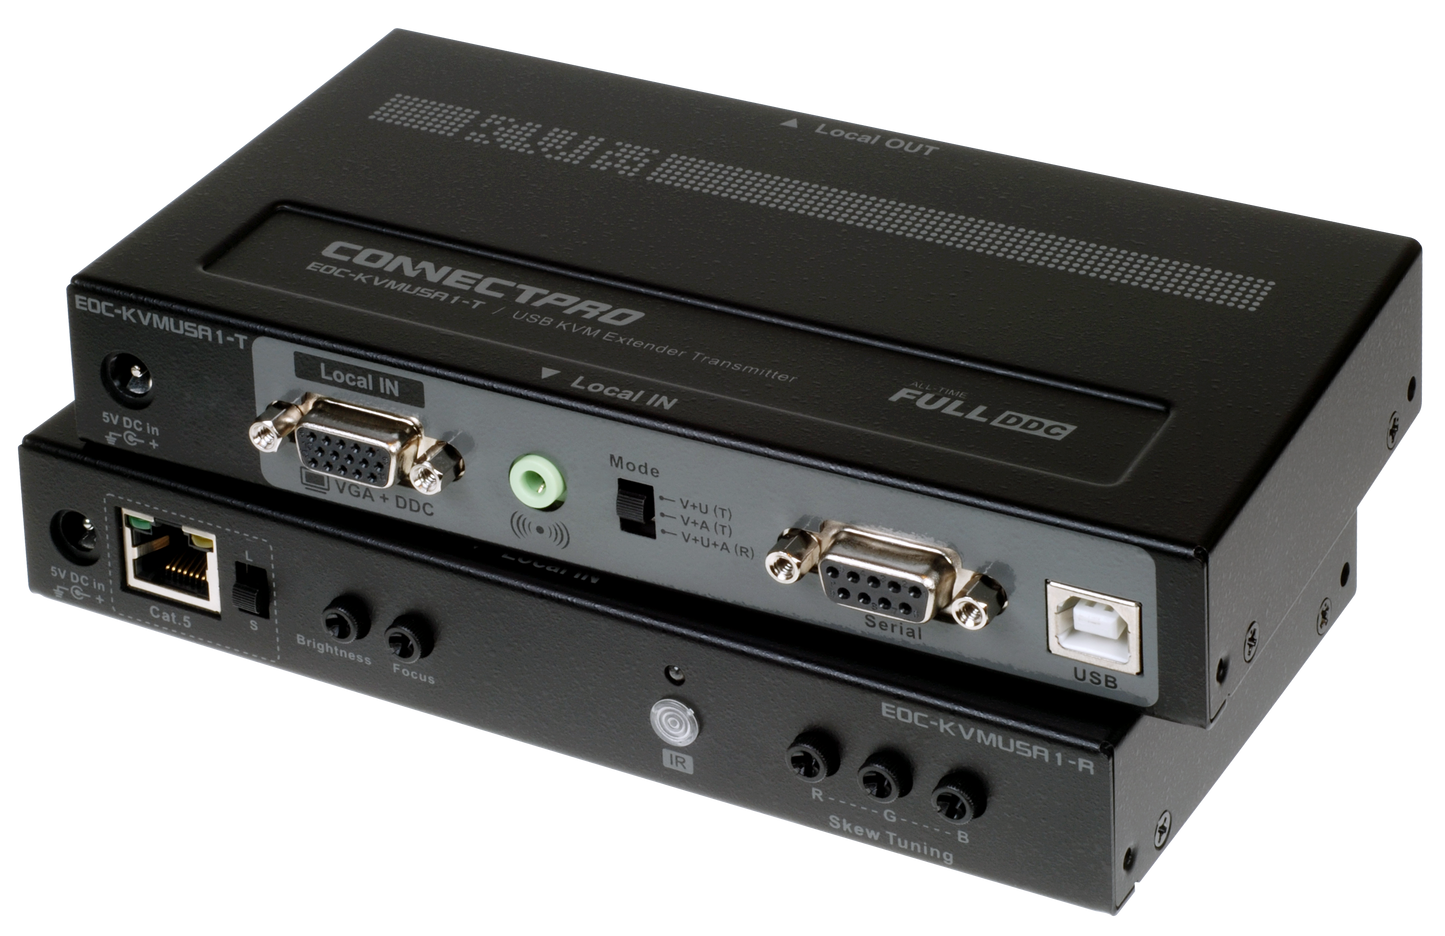 EOC-KVMUSA1 KVM Console Extender for Video, USB, Serial, and Audio over CATx Cable